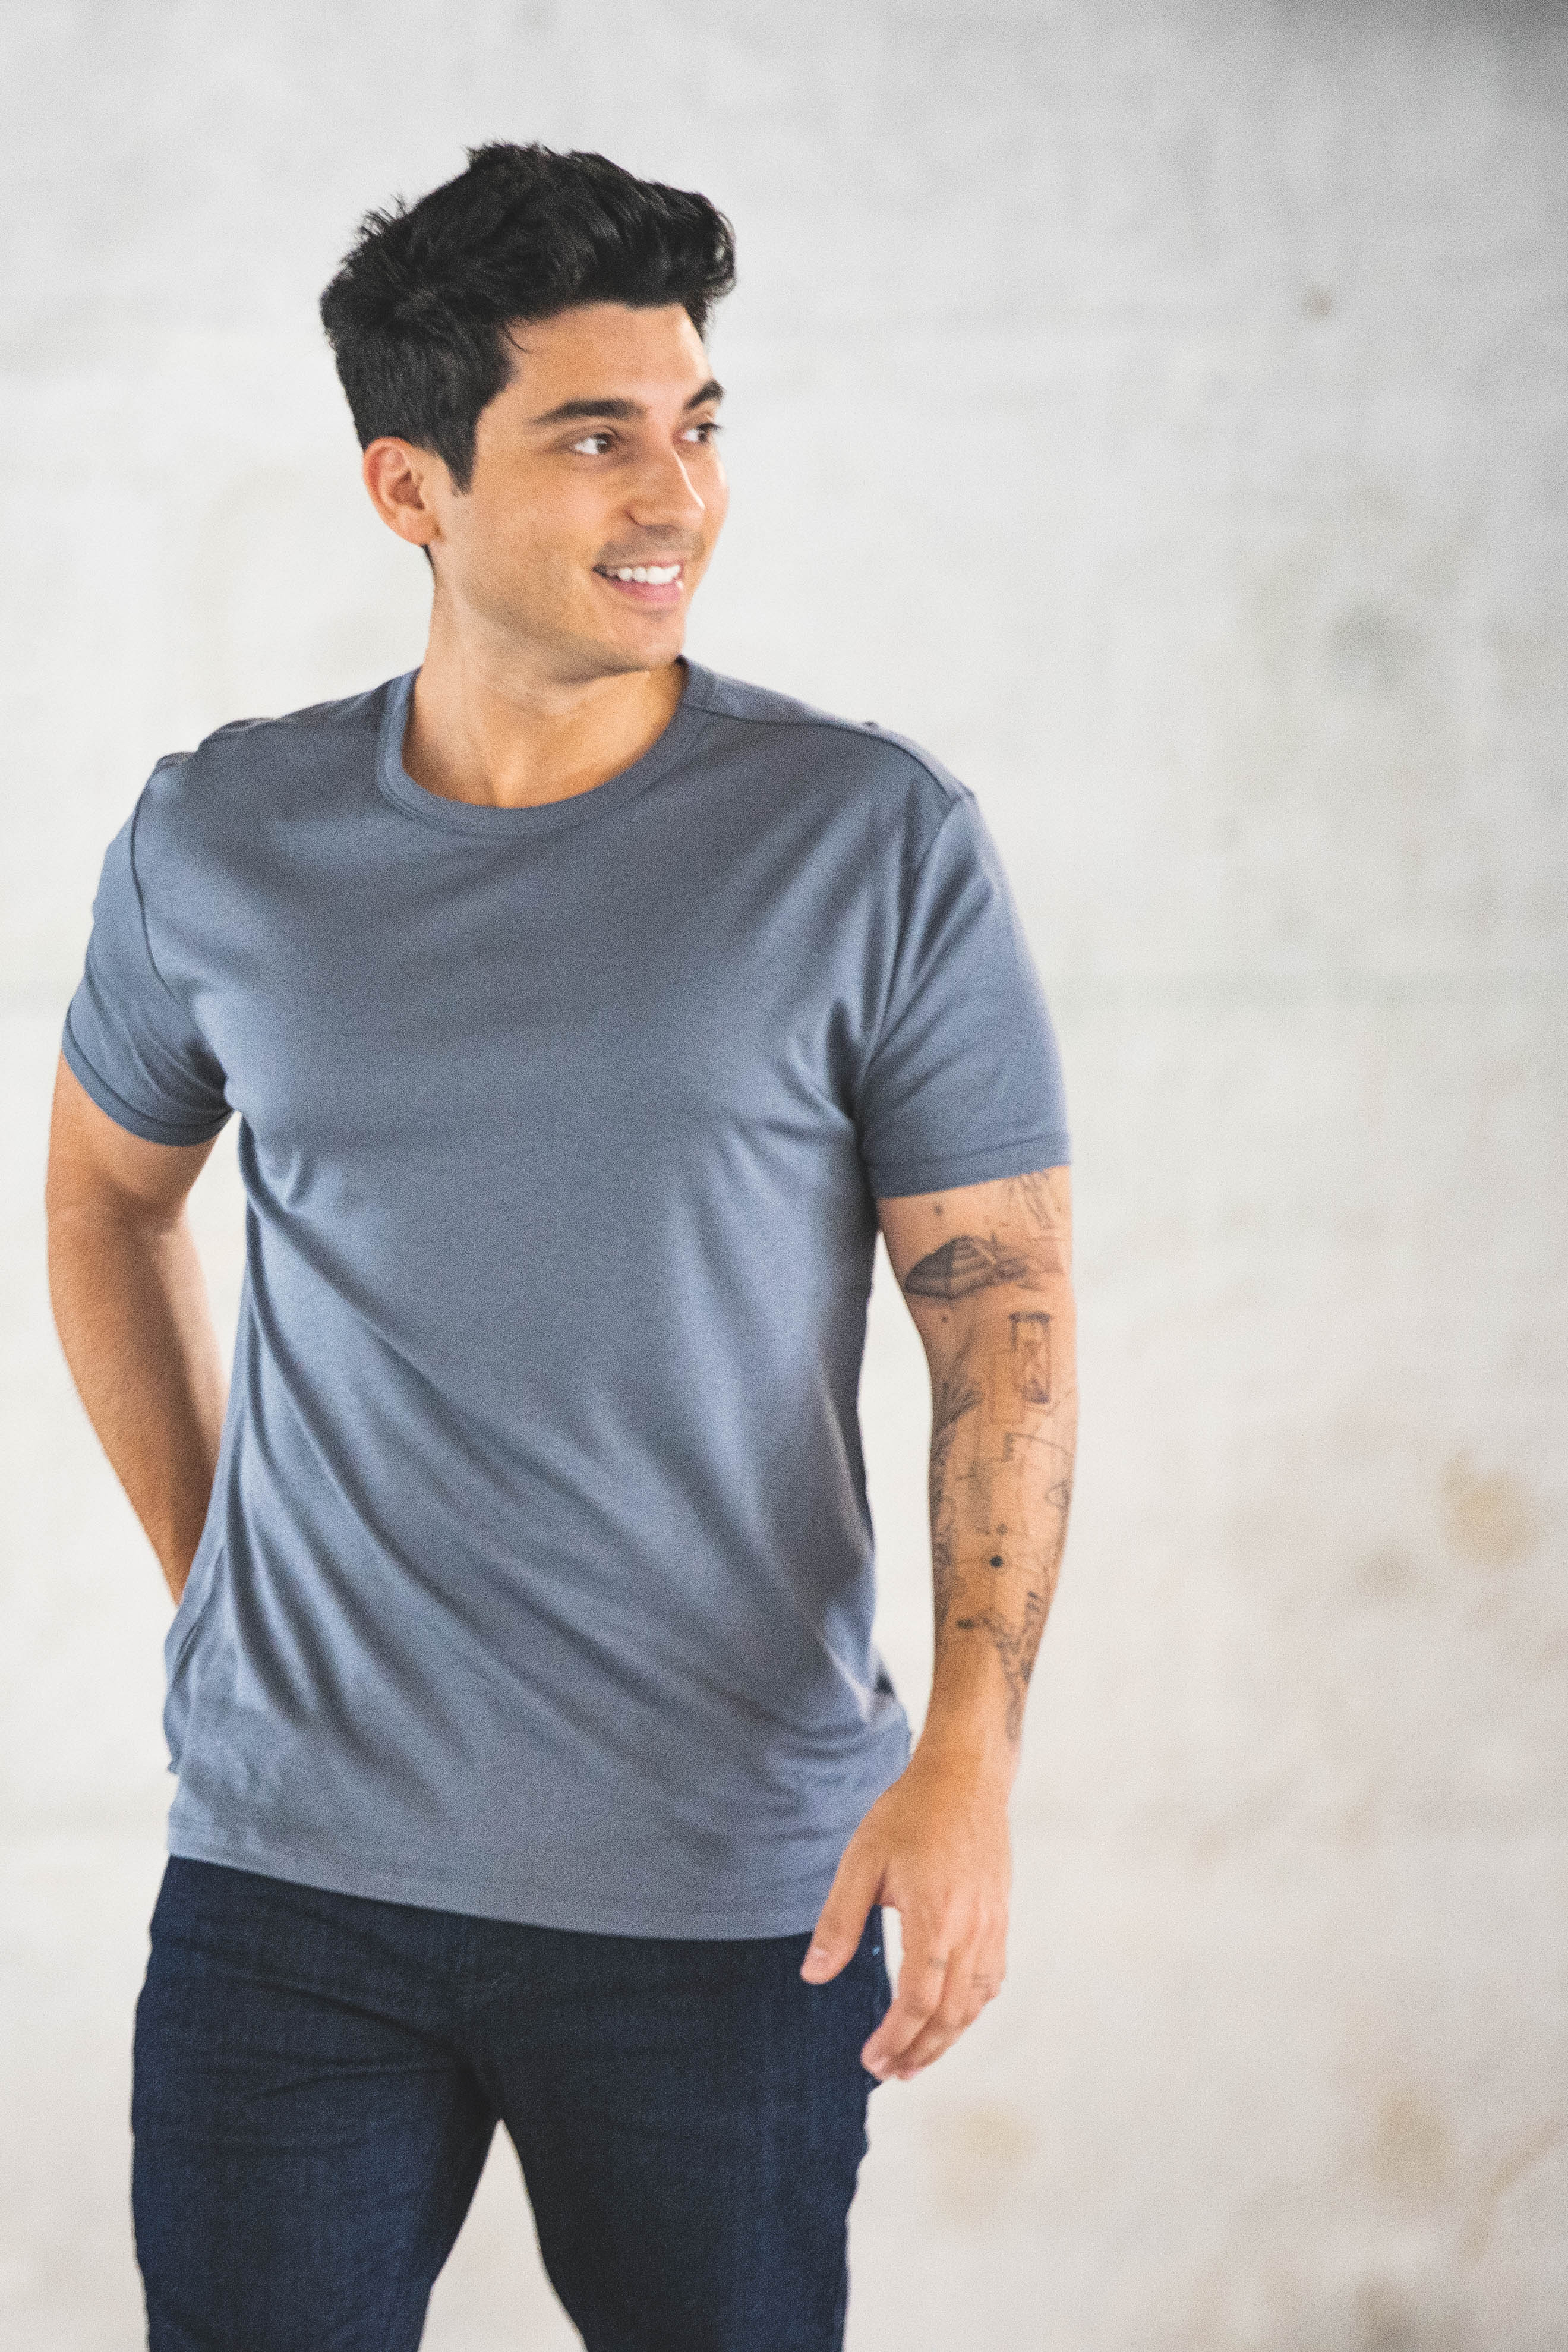 A man with short dark hair is smiling and looking to the side. He is wearing a gray t-shirt and dark blue jeans, with tattoos visible on his left arm